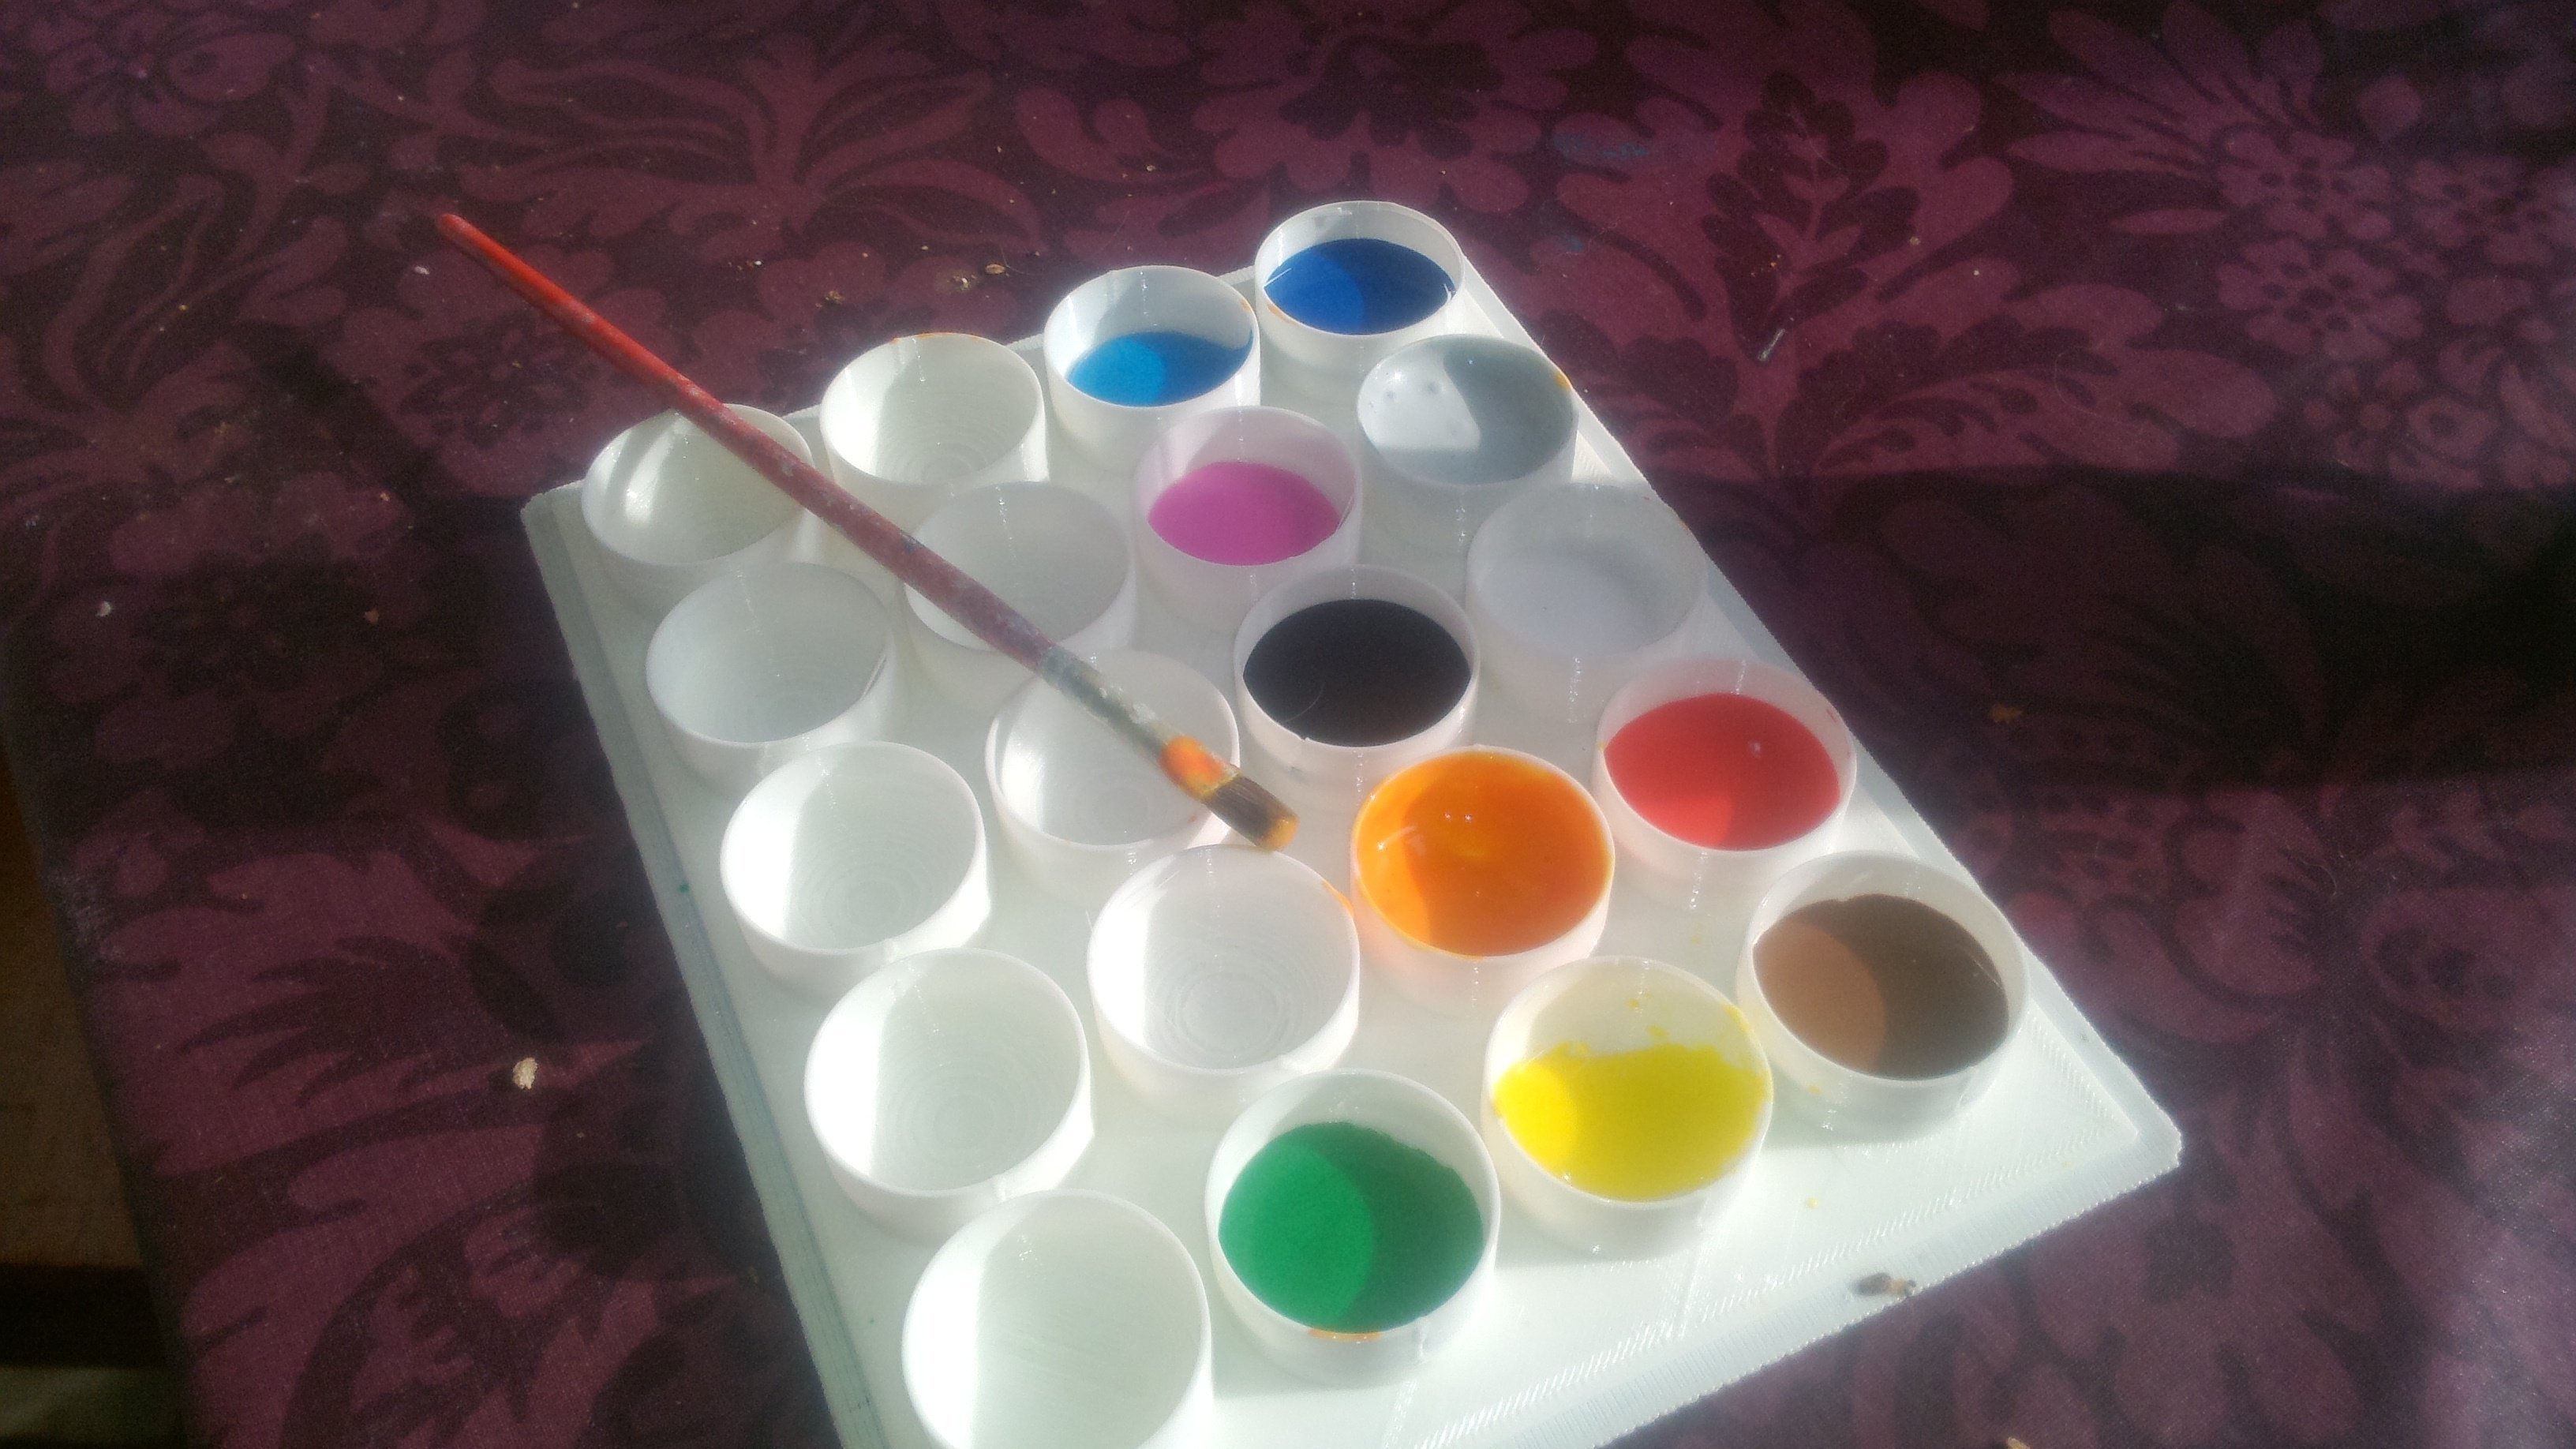 3D Printed Paint Tray ____ each tray will individually be sealed by mvs